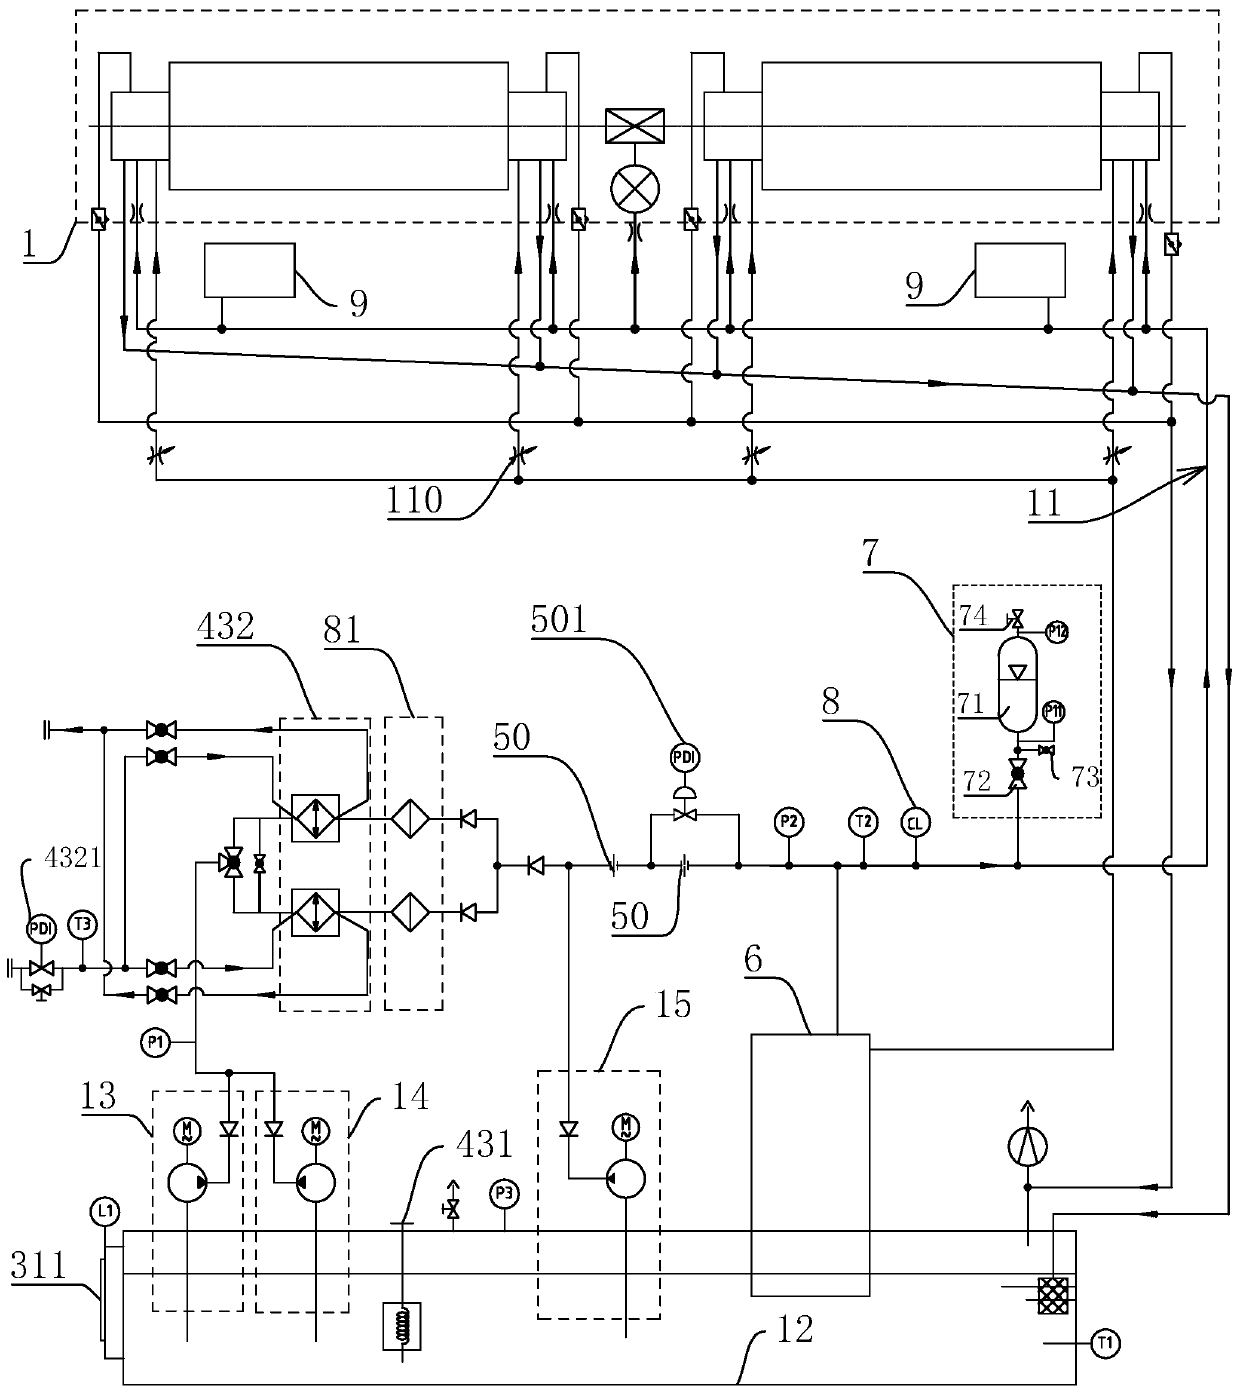 Rotating-shaft-type main engine intelligent lubricating system and control method thereof